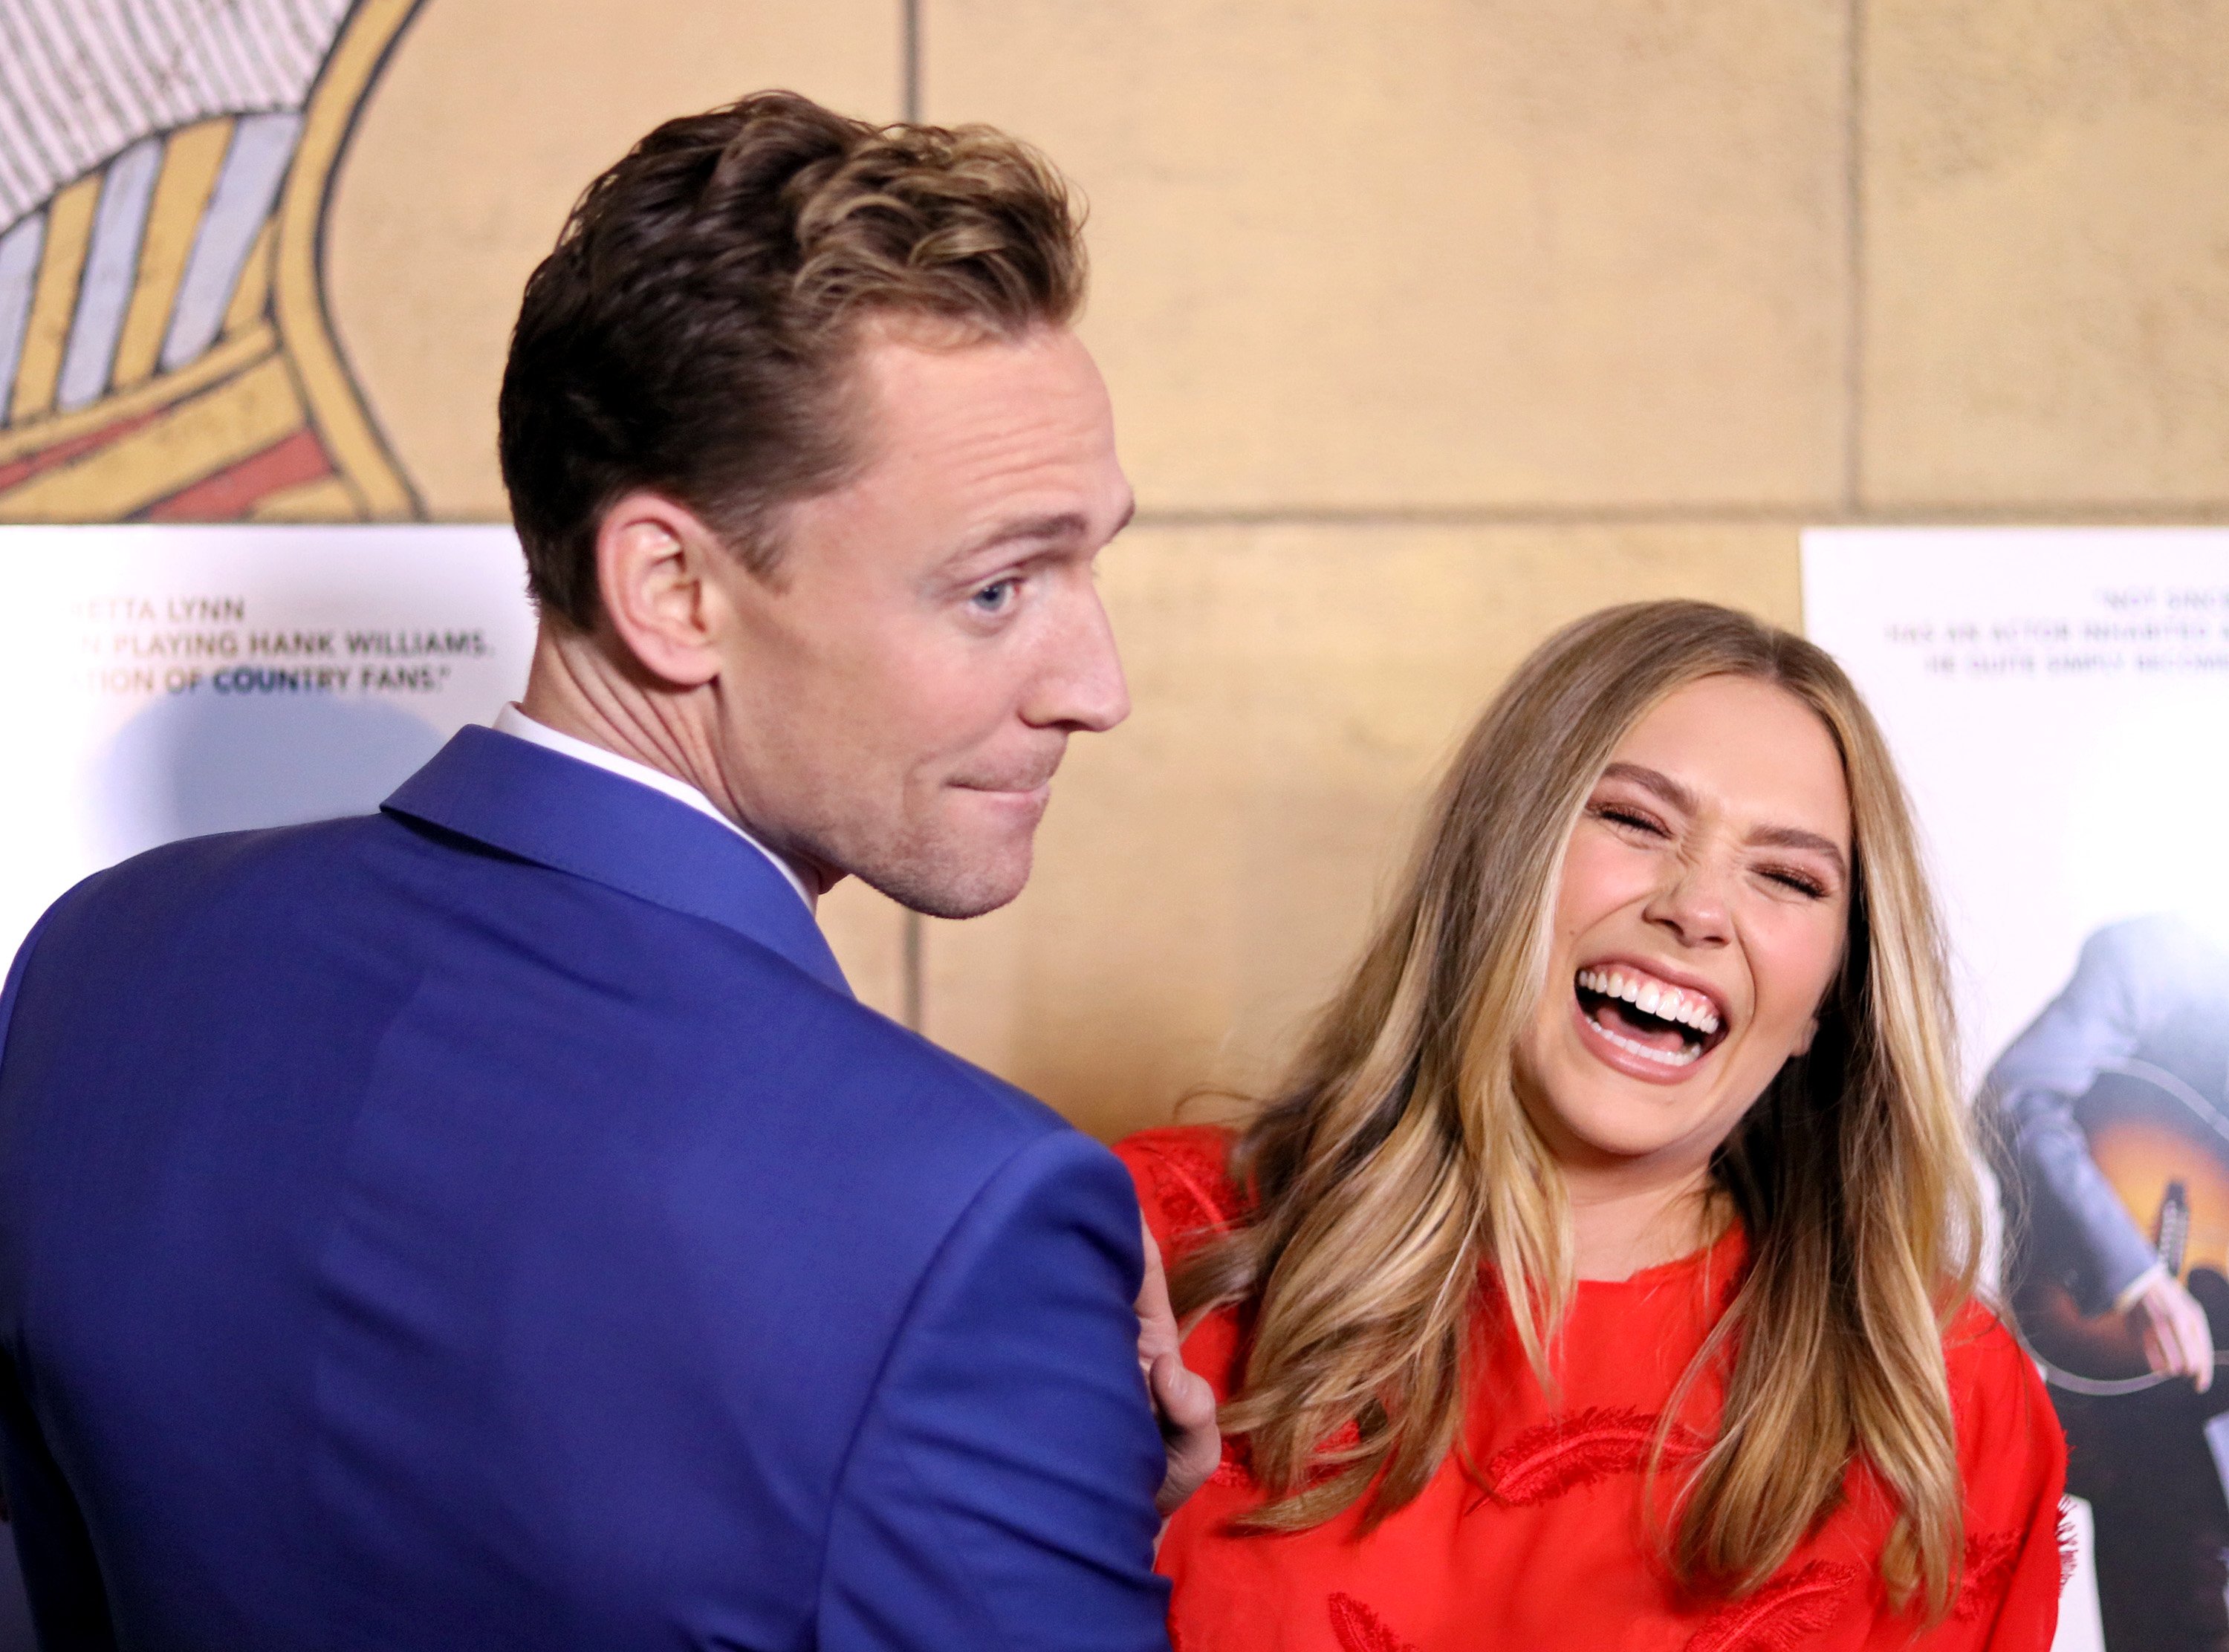 Tom Hiddleston and Elizabeth Olsen at the premiere of "I Saw the Light" on March 22, 2016 | Source: Getty Images